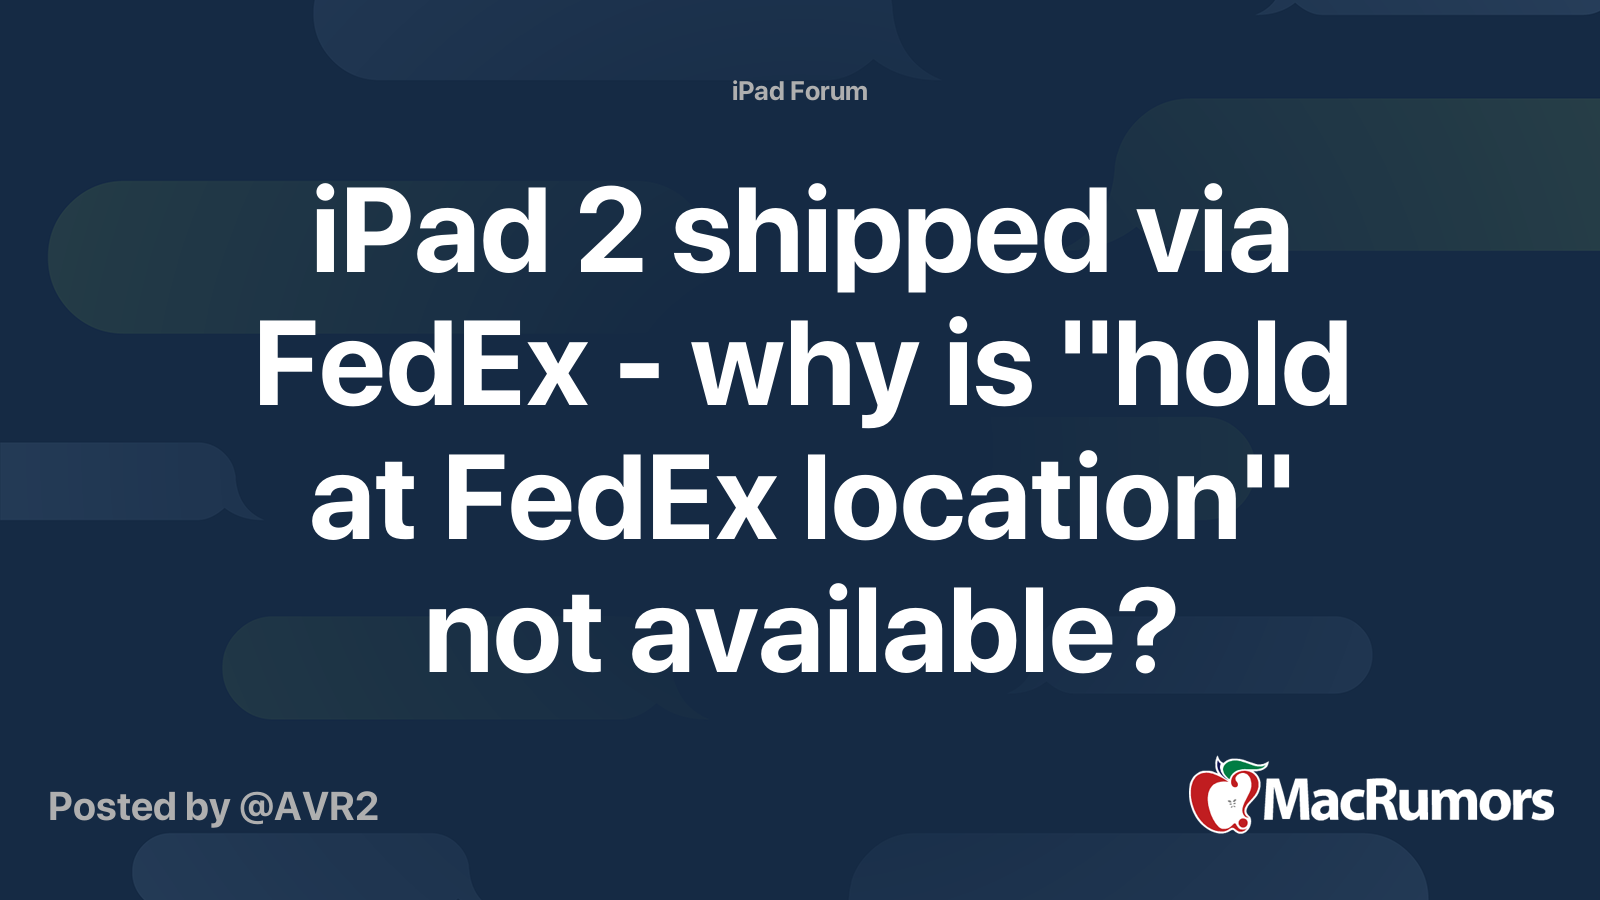 iPad 2 shipped via FedEx - why is hold at FedEx location not